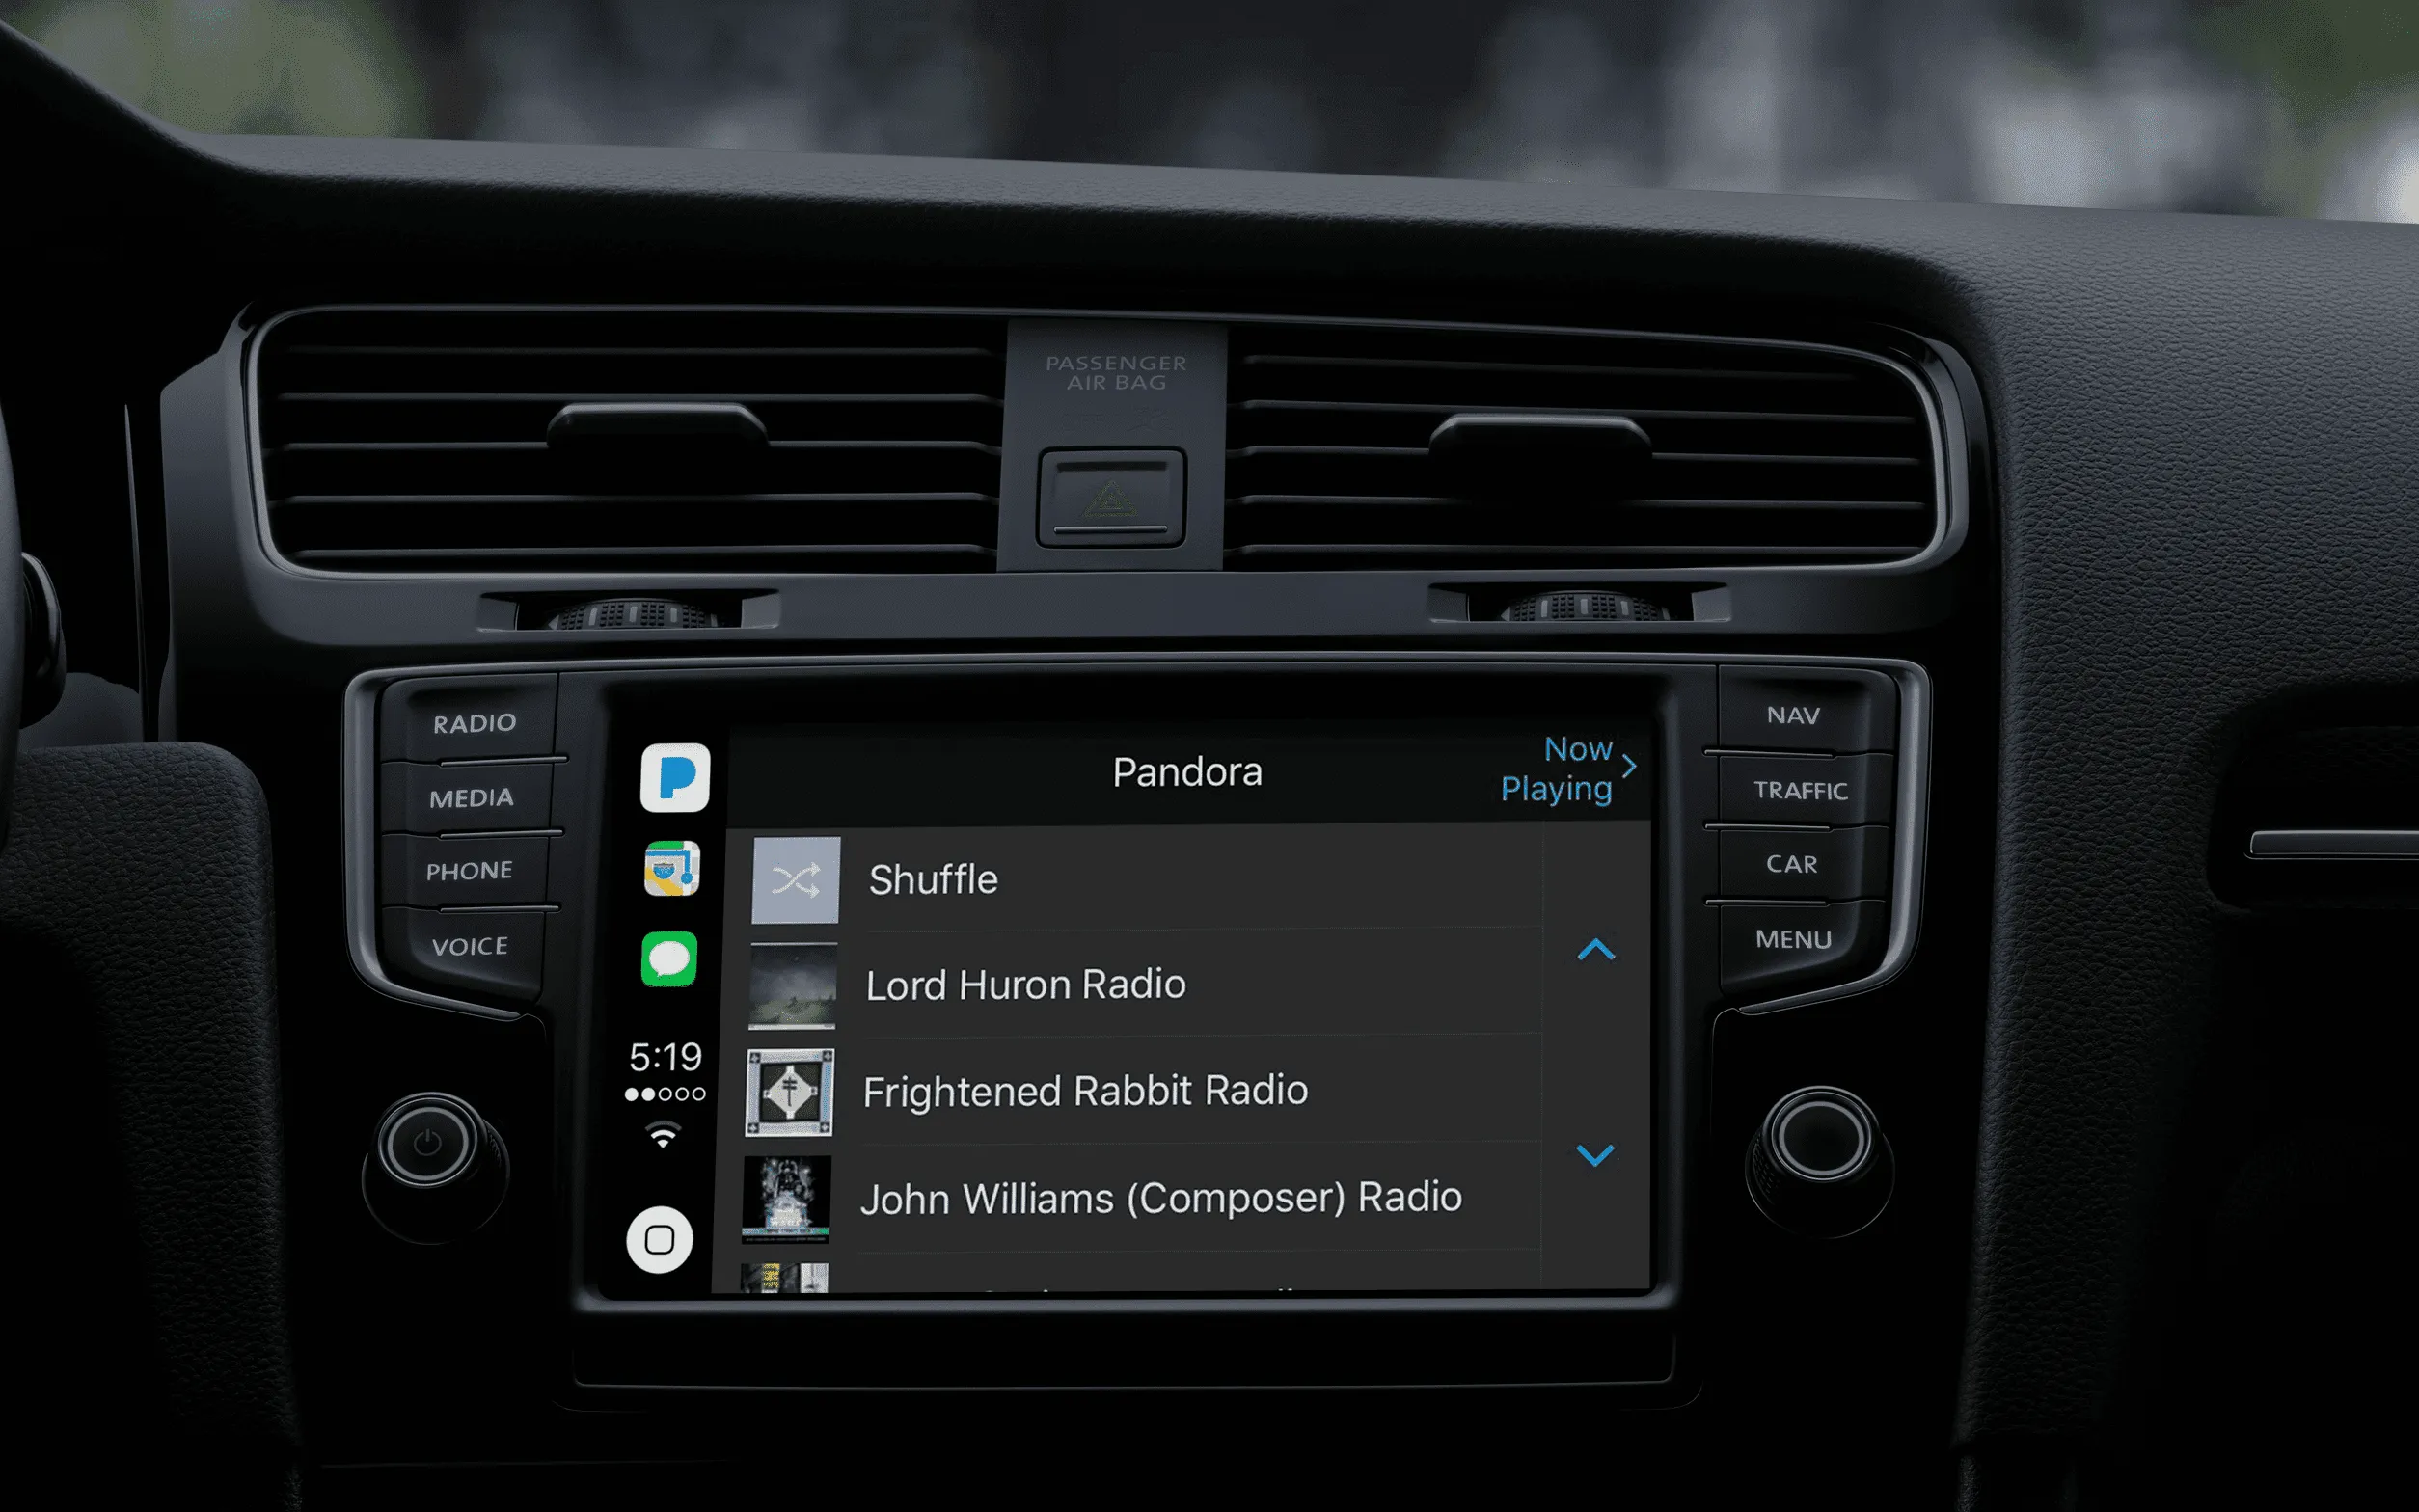 Apps supported by apple CarPlay: Pandora